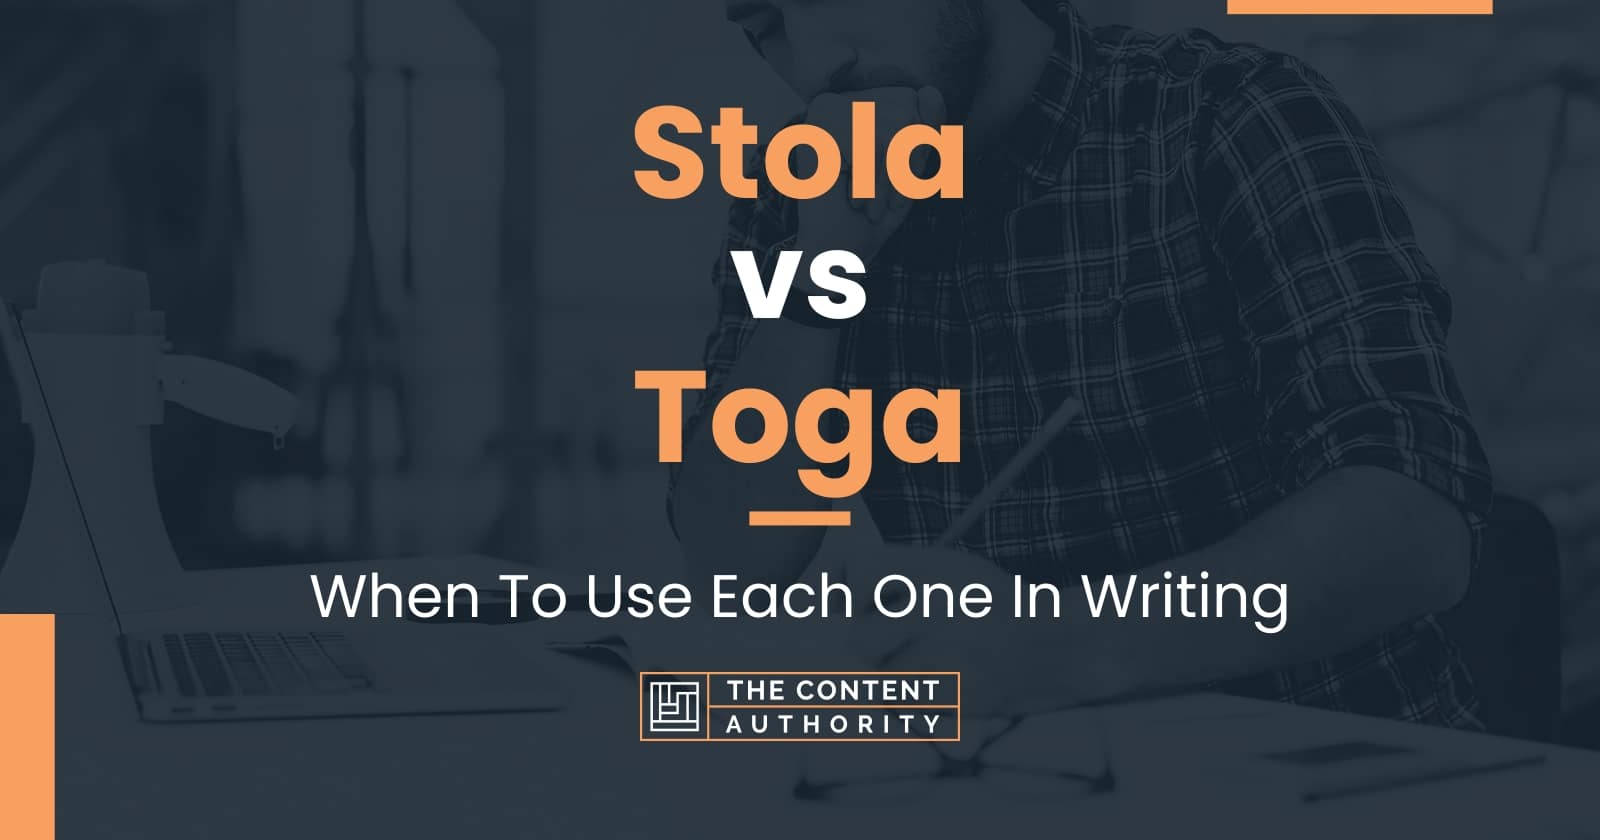 Stola vs Toga: When To Use Each One In Writing